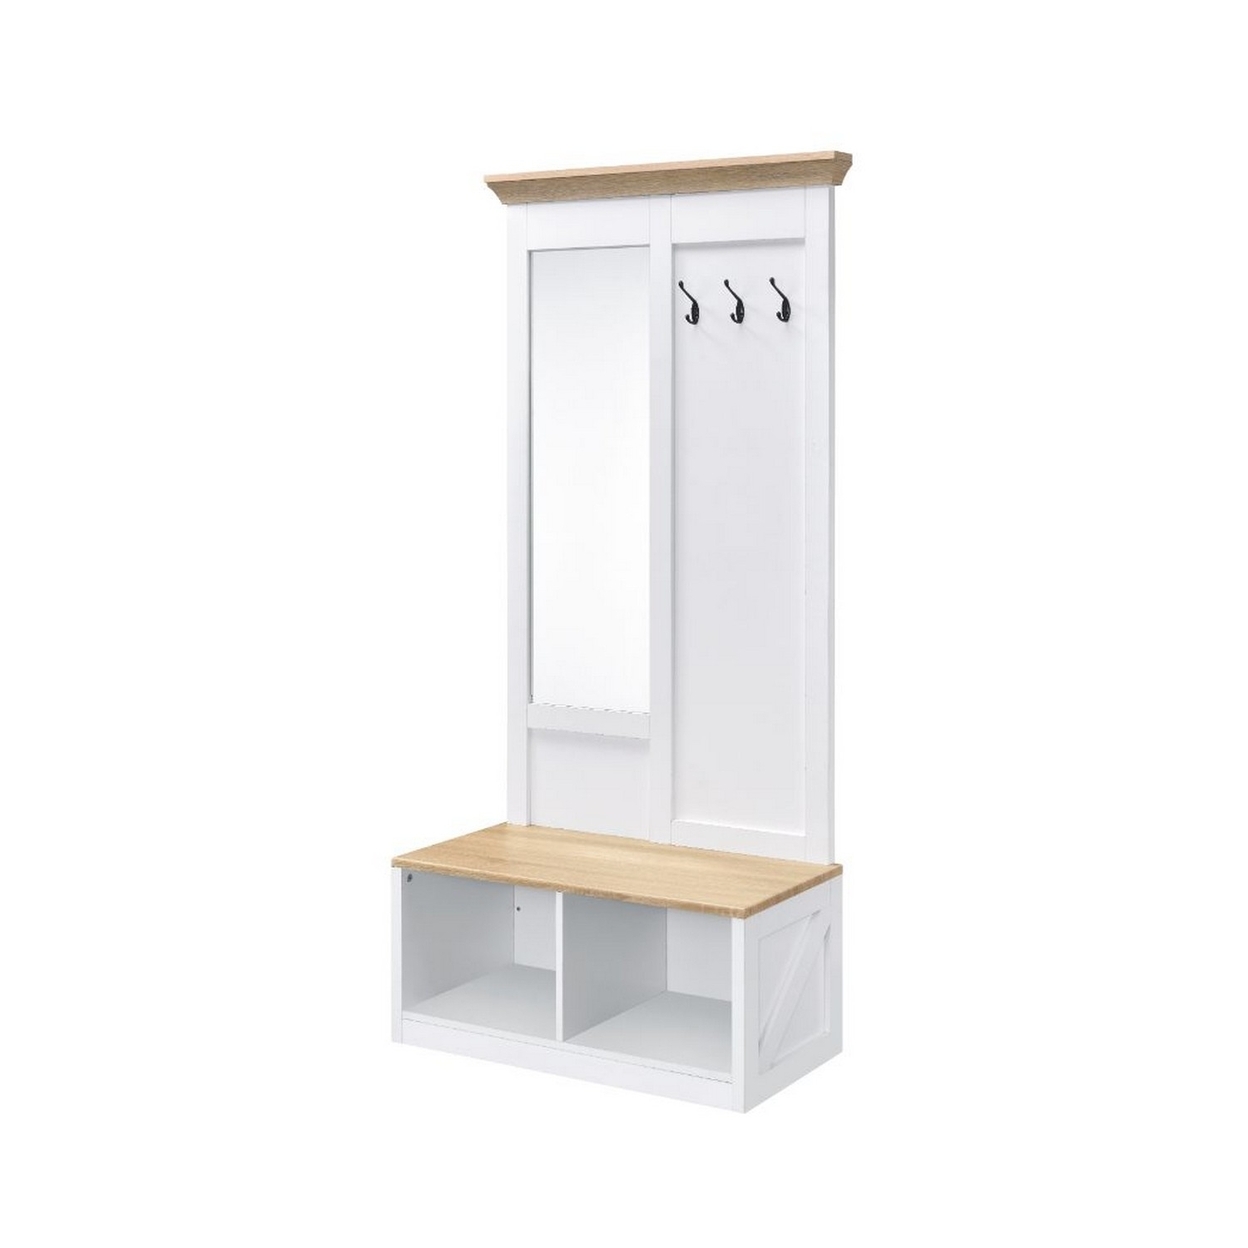 Hall Tree With Body Length Mirror And Bench Seat, White And Brown- Saltoro Sherpi